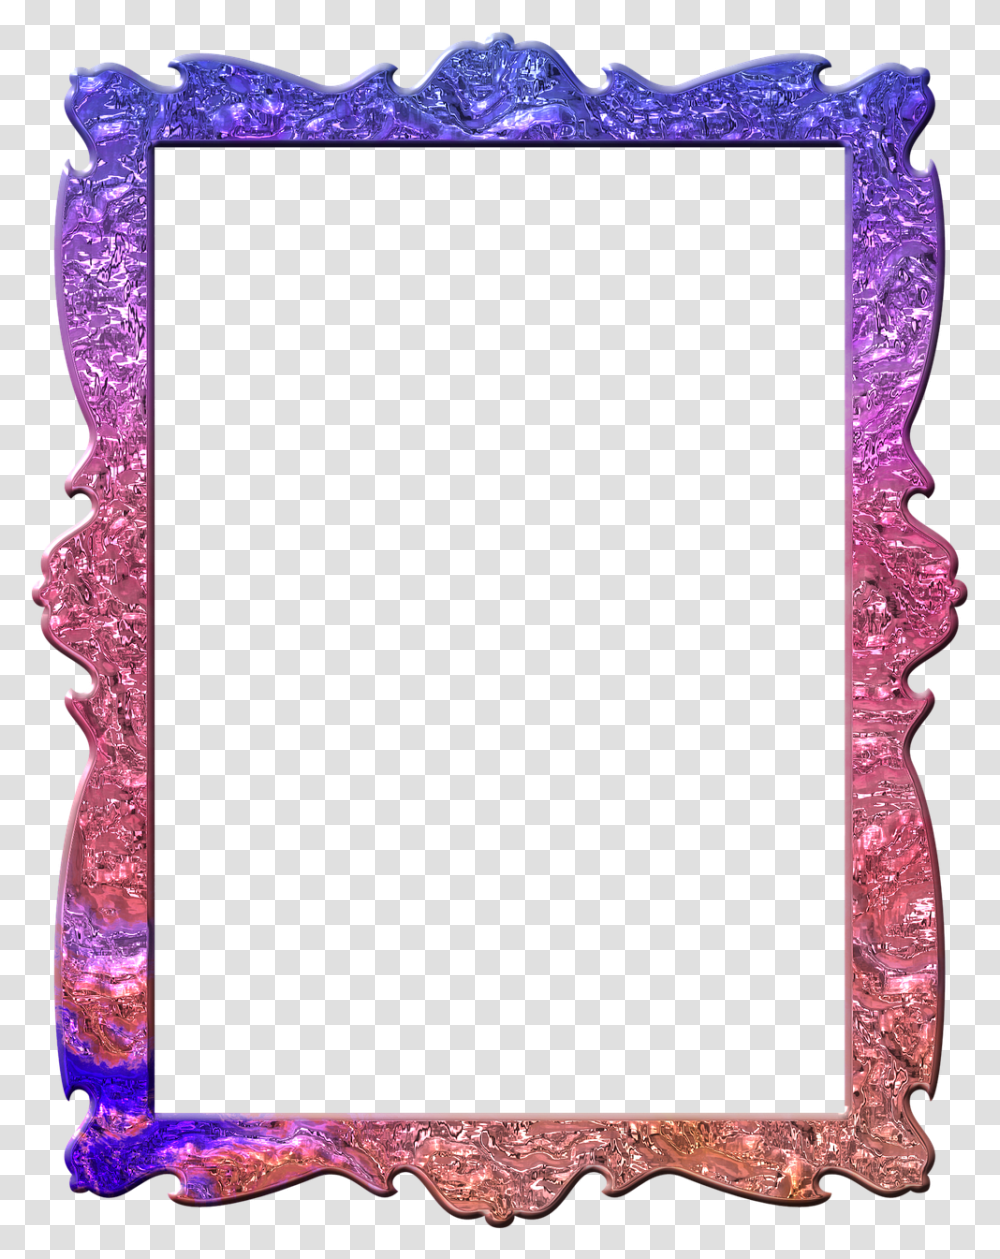 Framepicture Framepicture Frame Pictures Free Photos, Weapon, Weaponry, Blade, Sword Transparent Png